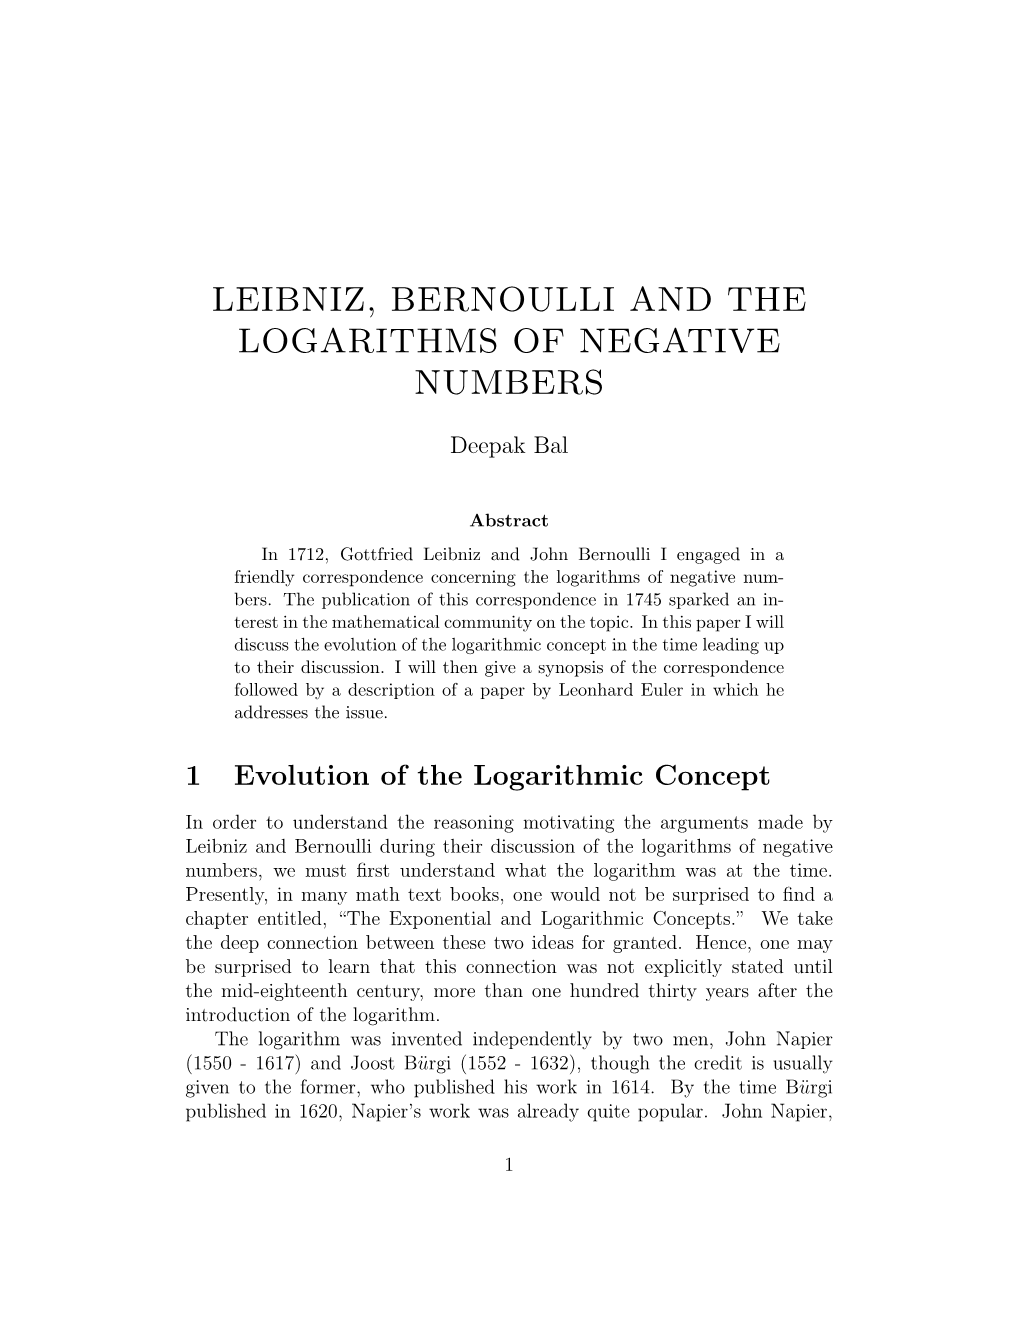 Leibniz, Bernoulli and the Logarithms of Negative Numbers